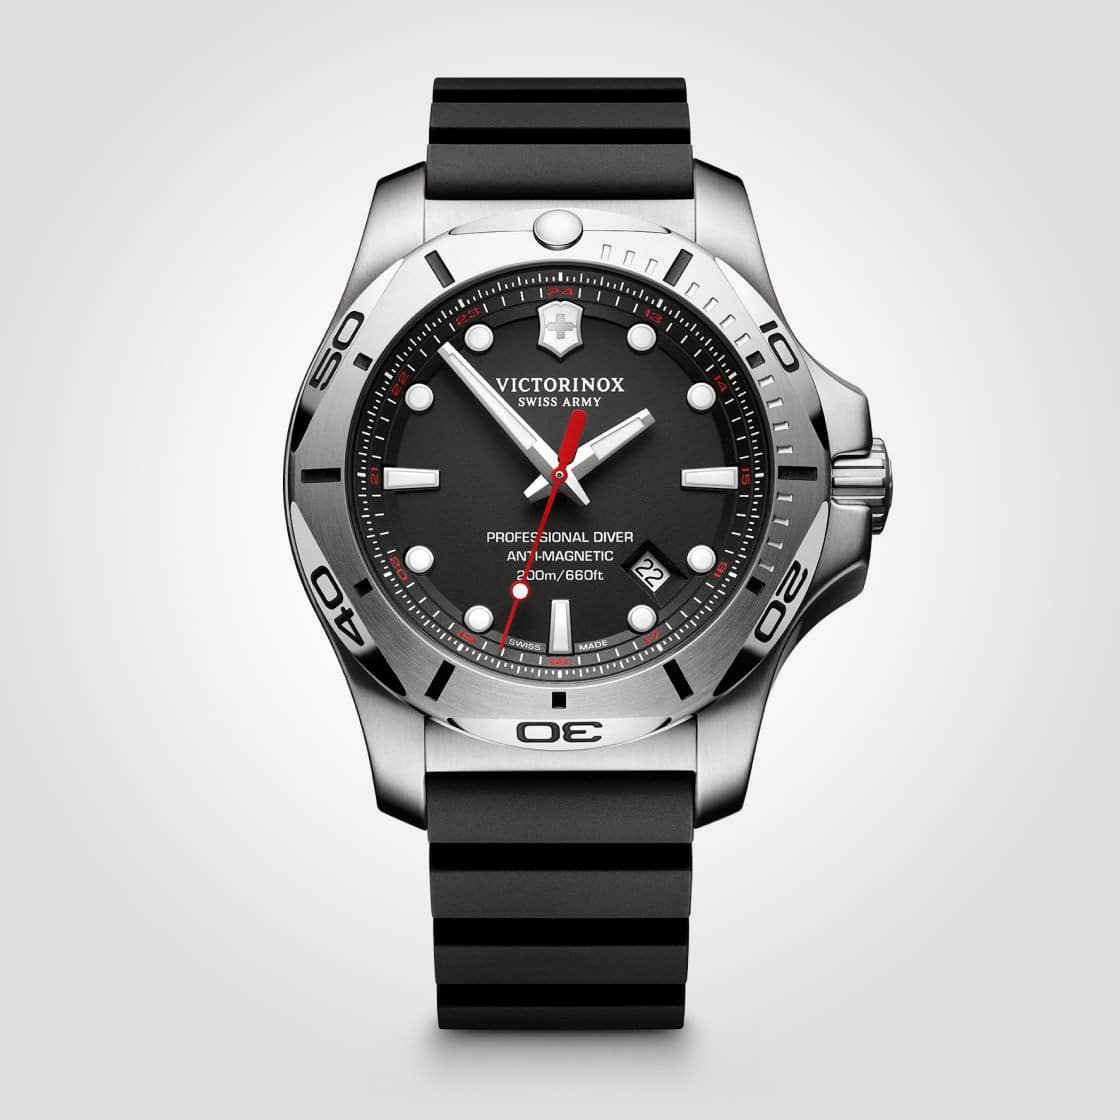 Victorinox Swiss Army I.N.O.X. Professional Dive Watch with black dial and watch band. Photo: